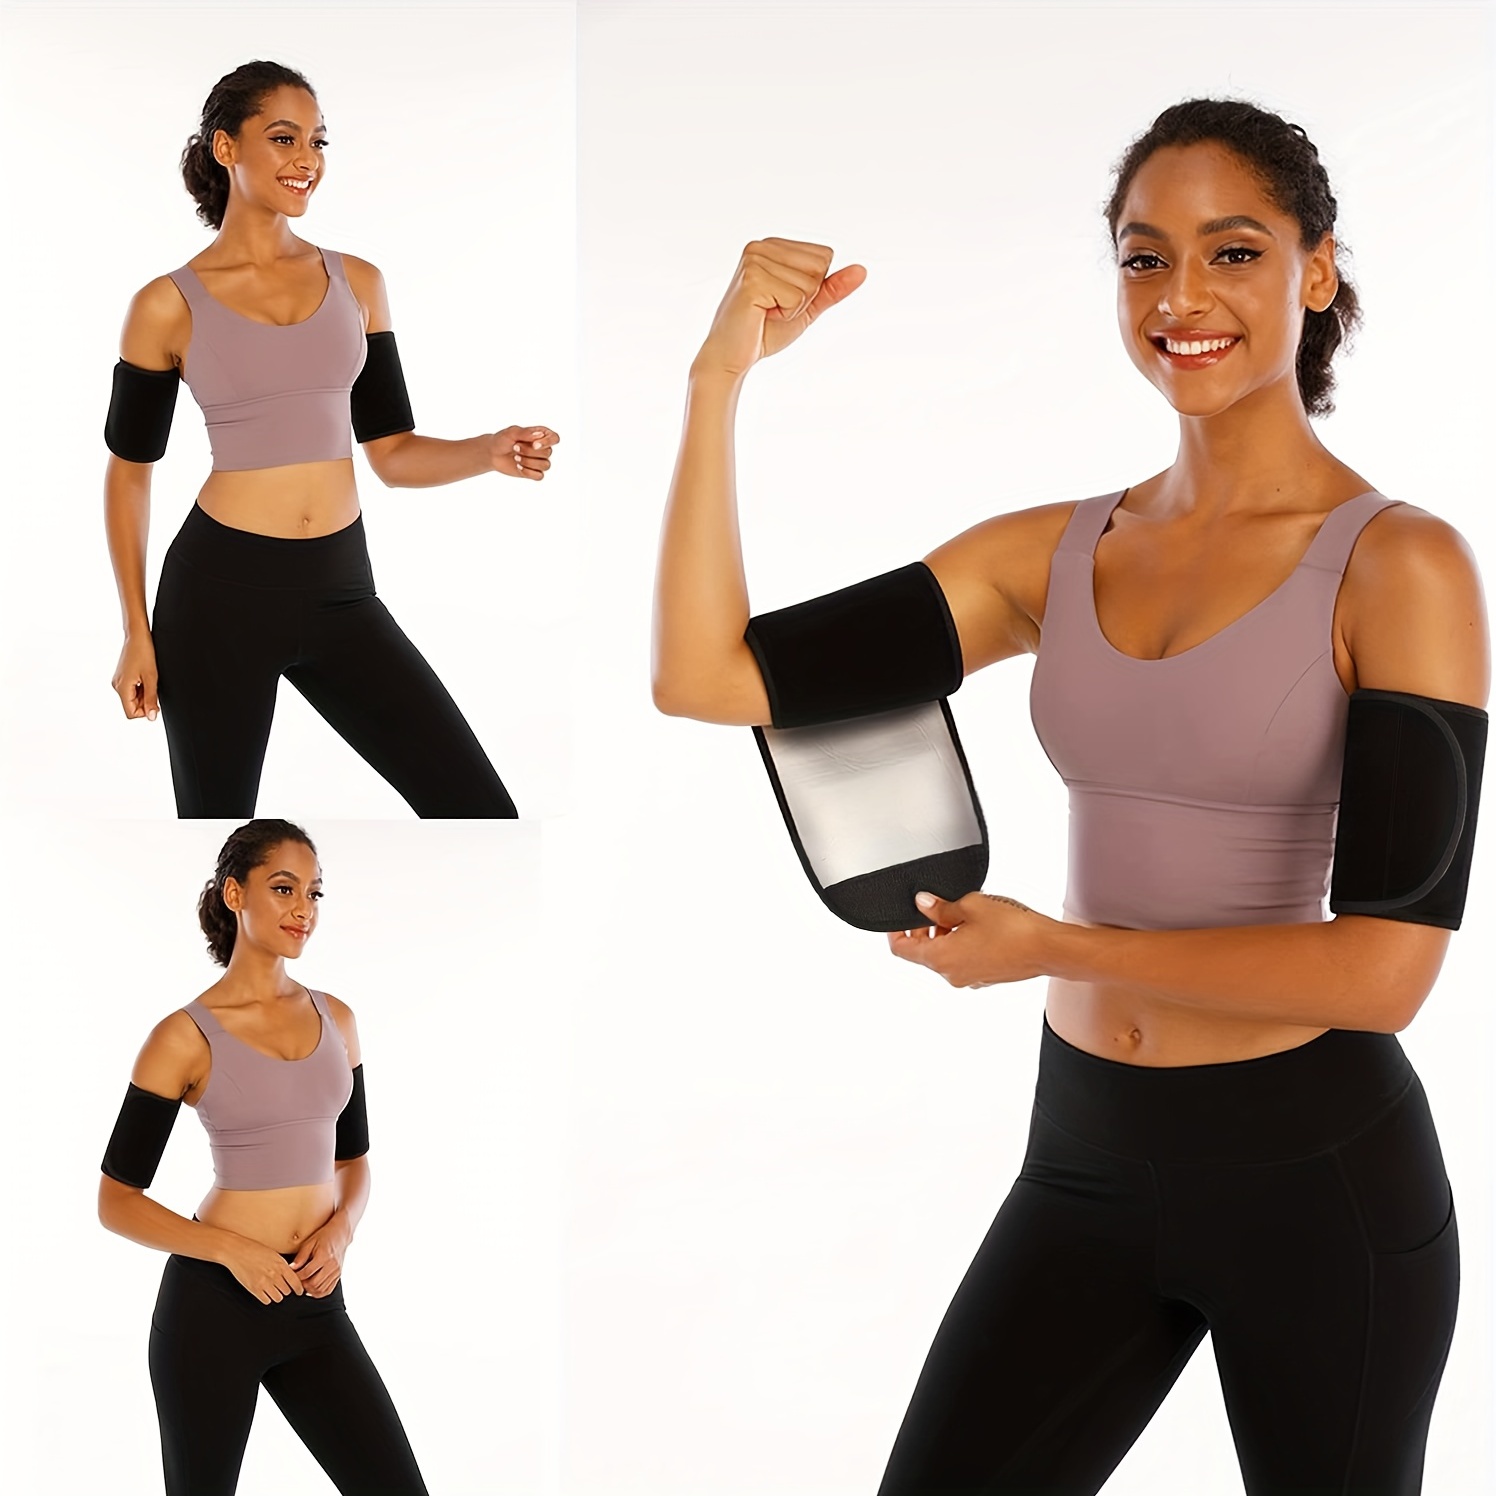 Womens Sweat Shaper Arm Trimmers Cellulite Slimming Wrap Belt With